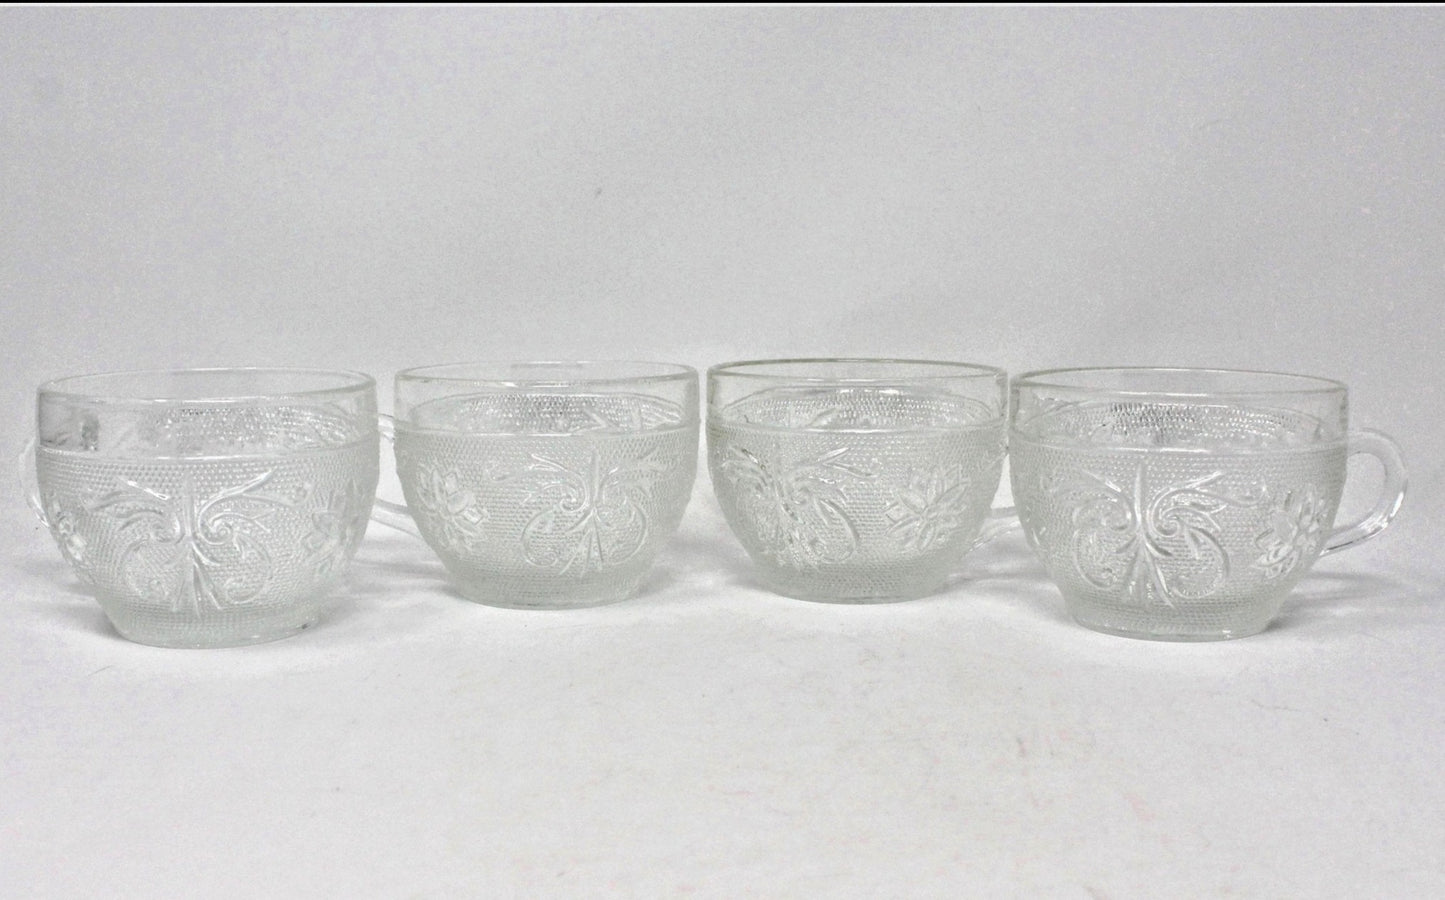 Coffee Cups, Indiana Glass / Tiara, Sandwich Clear Set of 4, Vintage